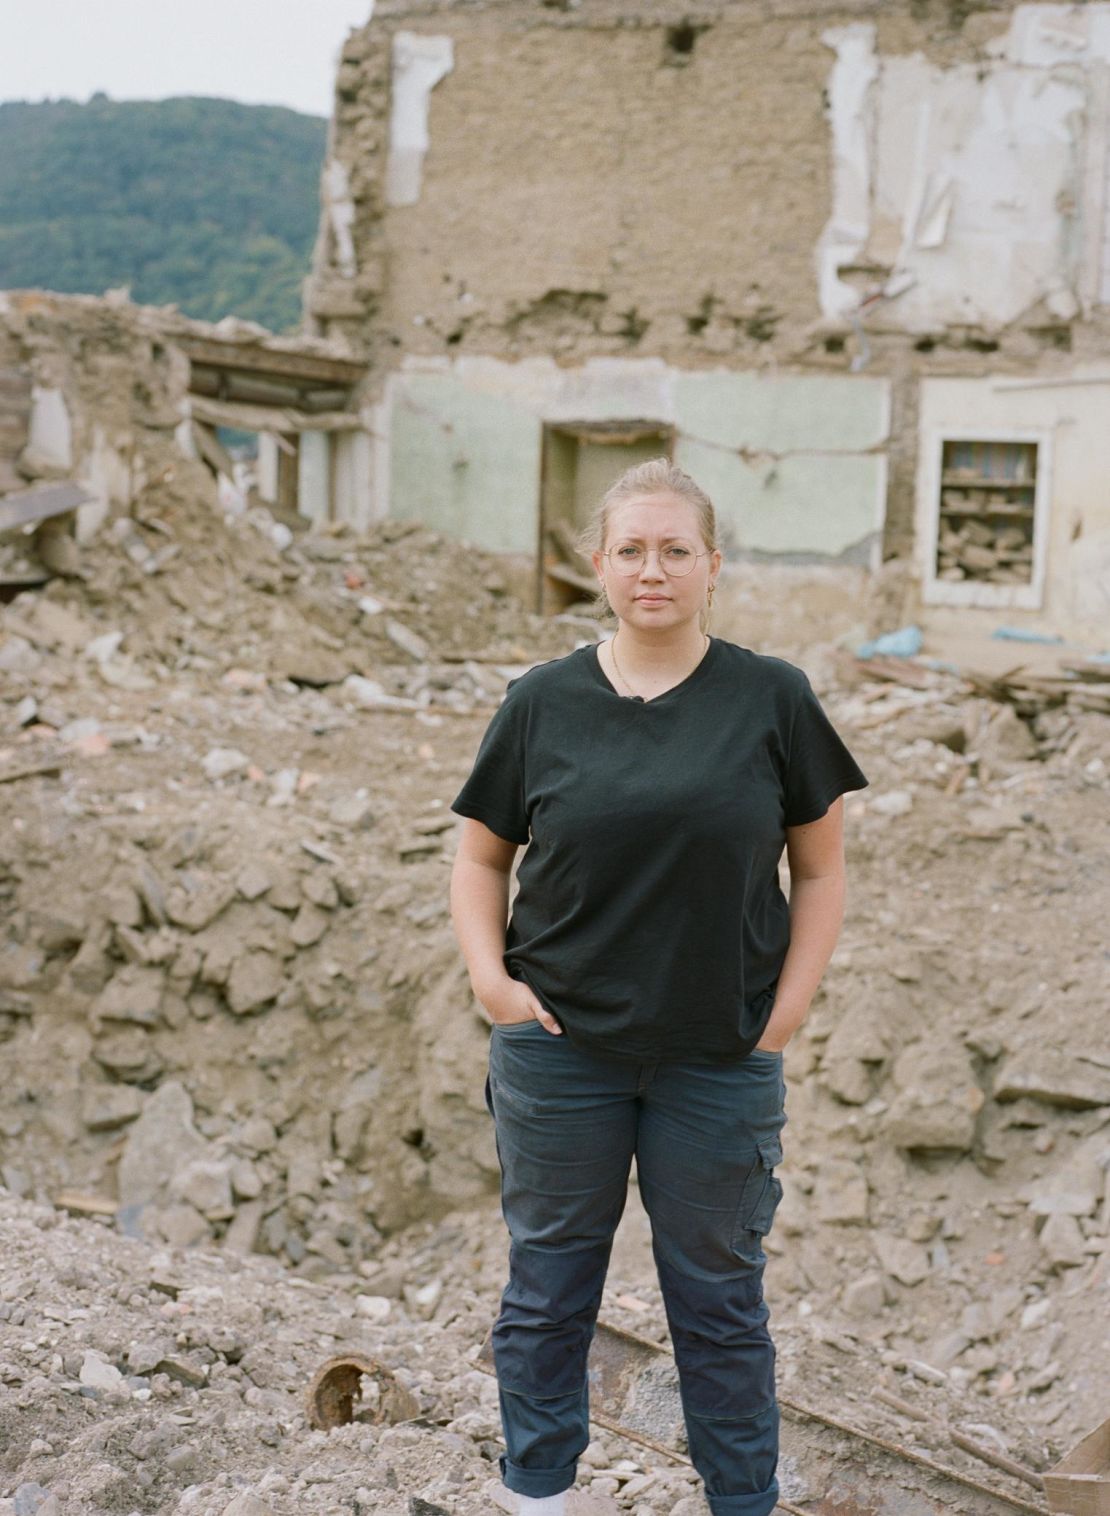 Franziska Schnitzler's family hotel and restaurant was so badly damaged by this summers flooding in the Ahr Valley, Germany, that the building had to be torn down.